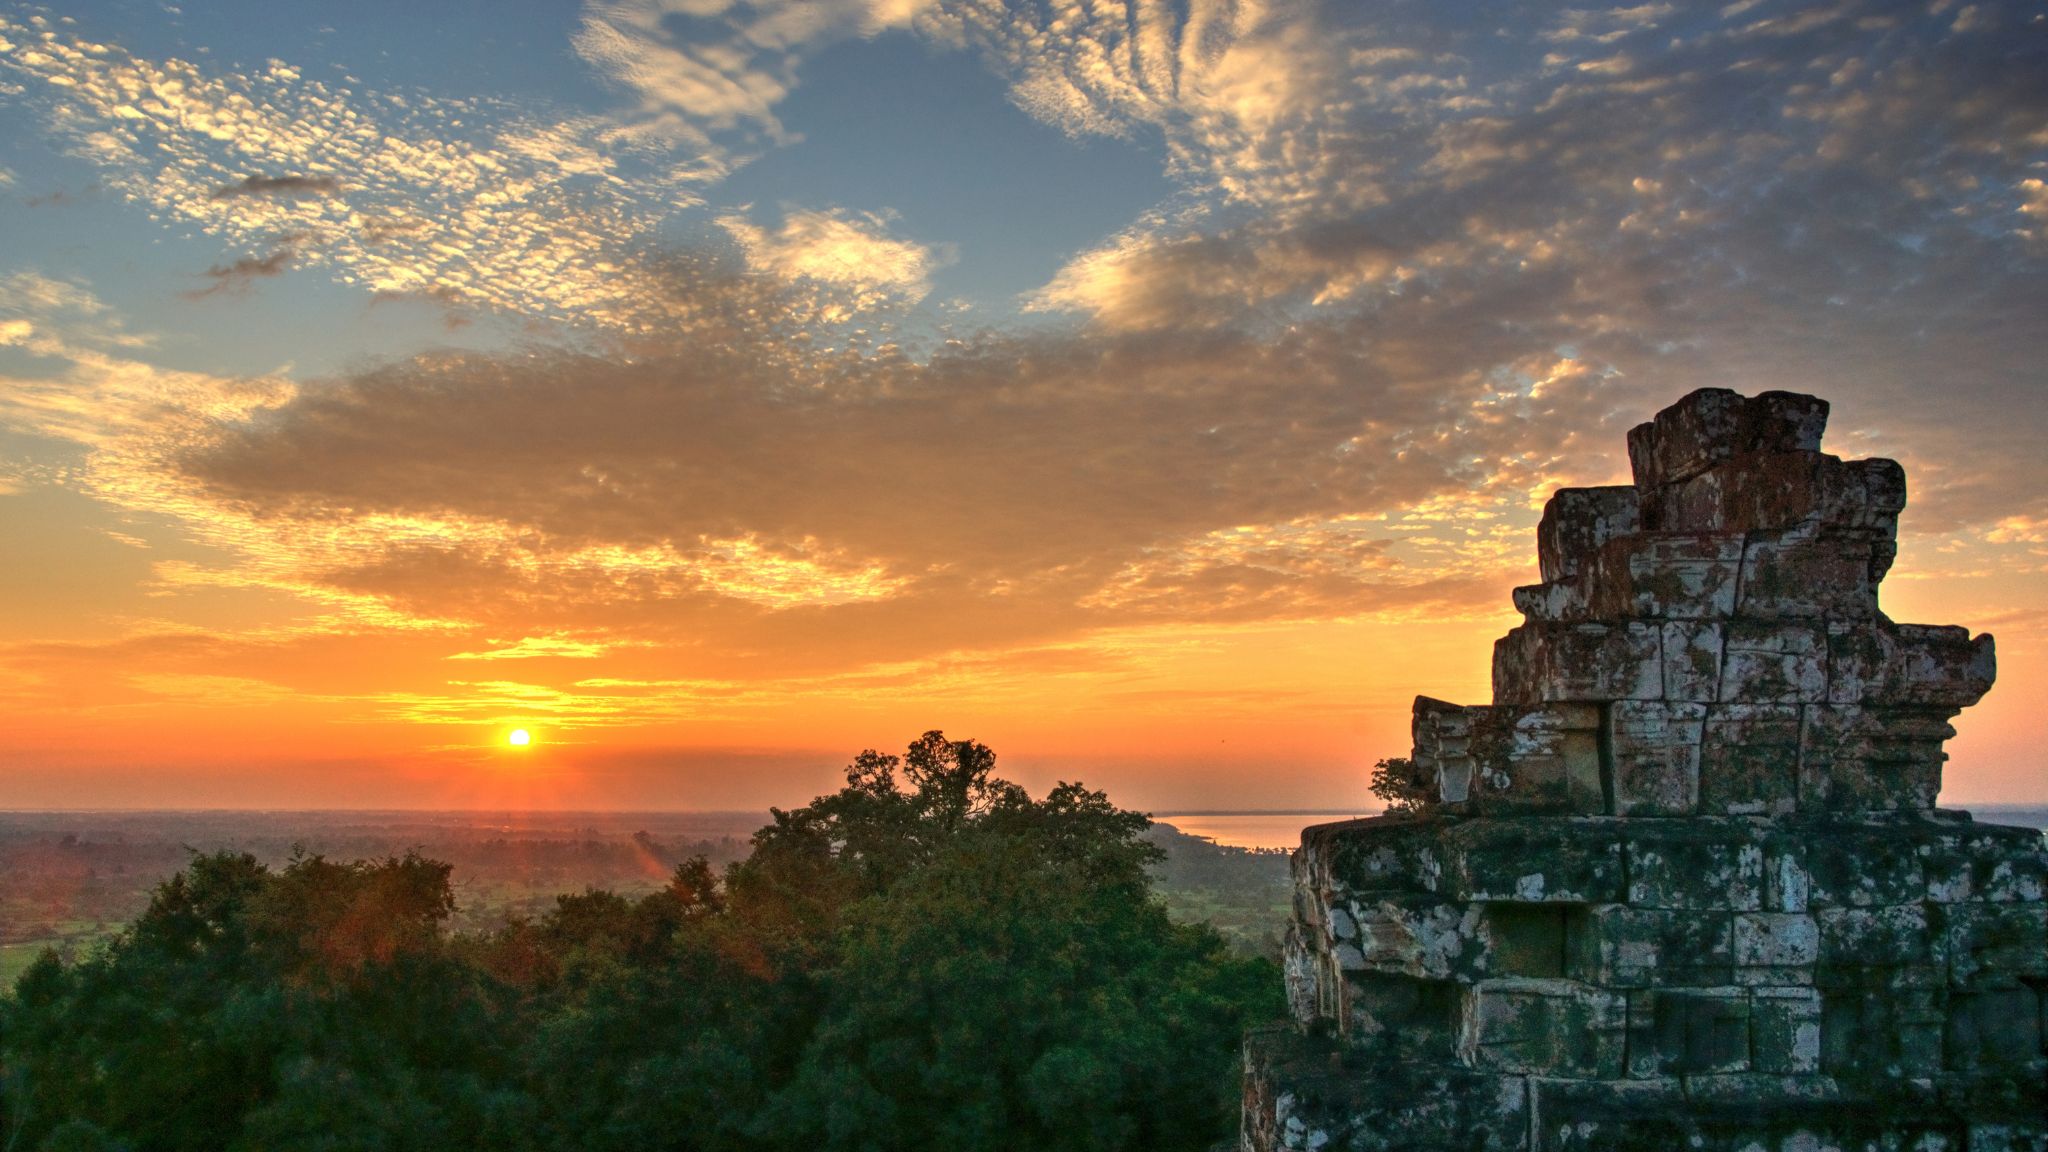 Day 1 Admire The Stunning Sunset View From Angkor